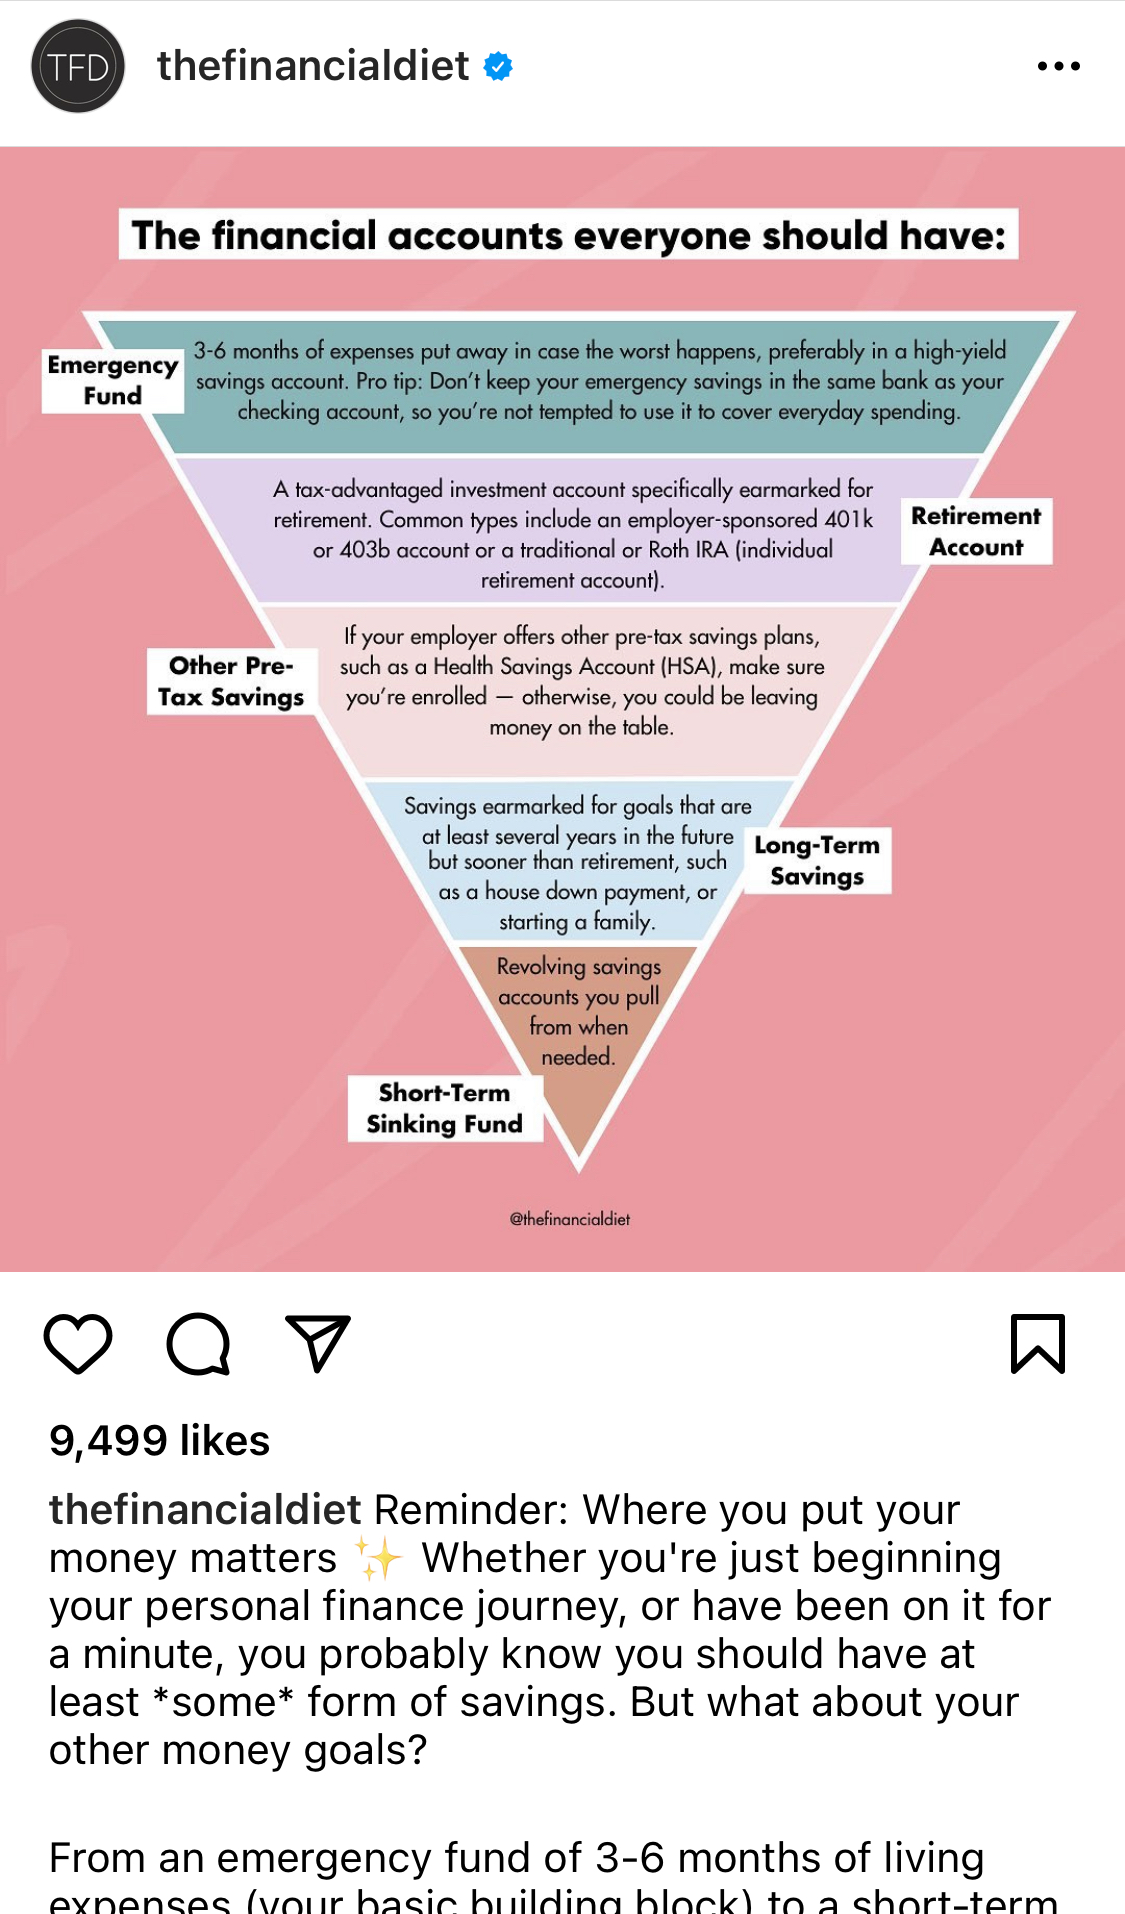 Example of “zero-click” content that provides value in an Instagram post.